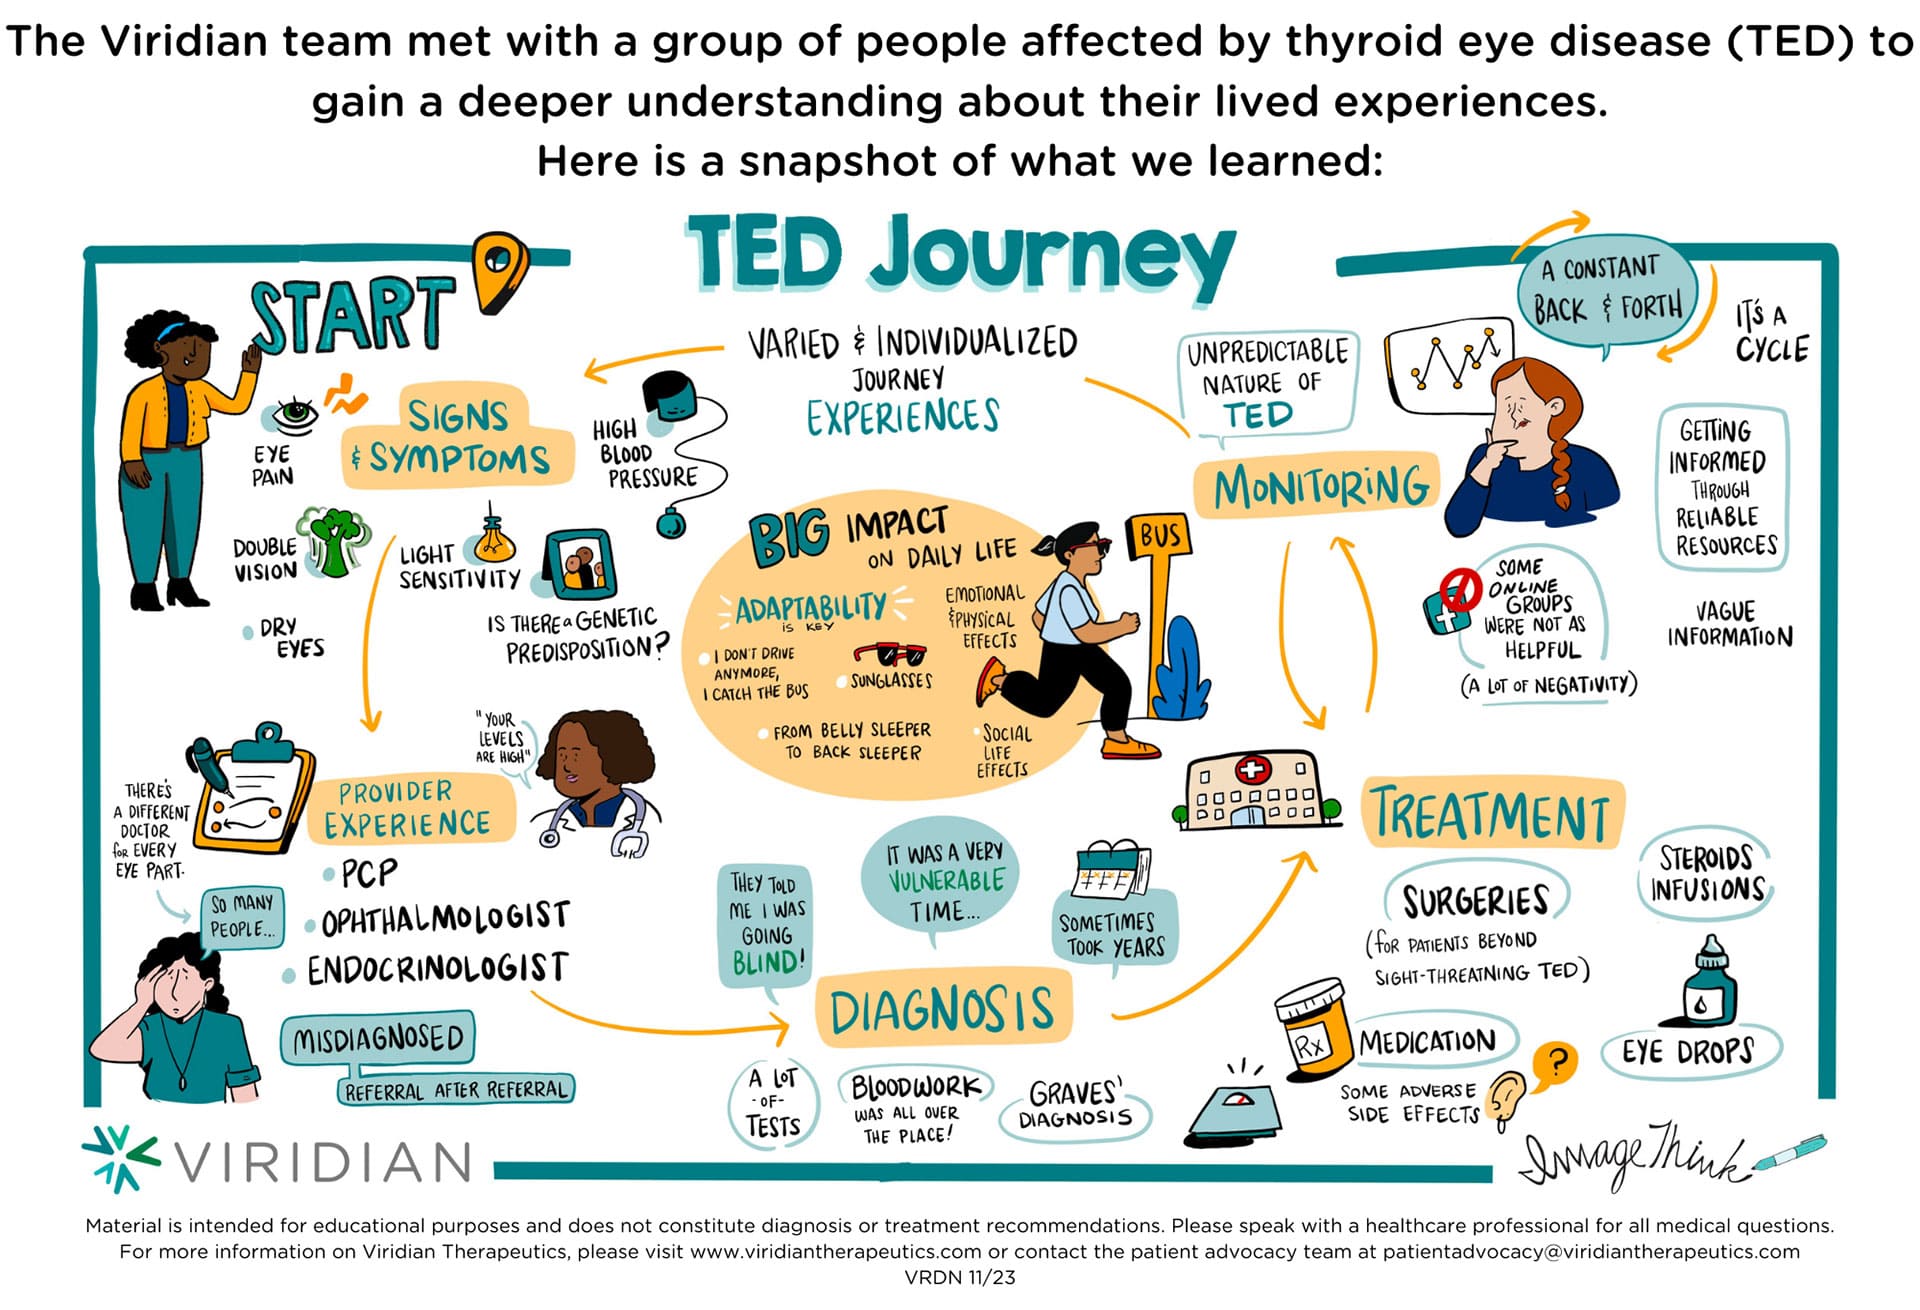 Understanding the TED Journey graphic